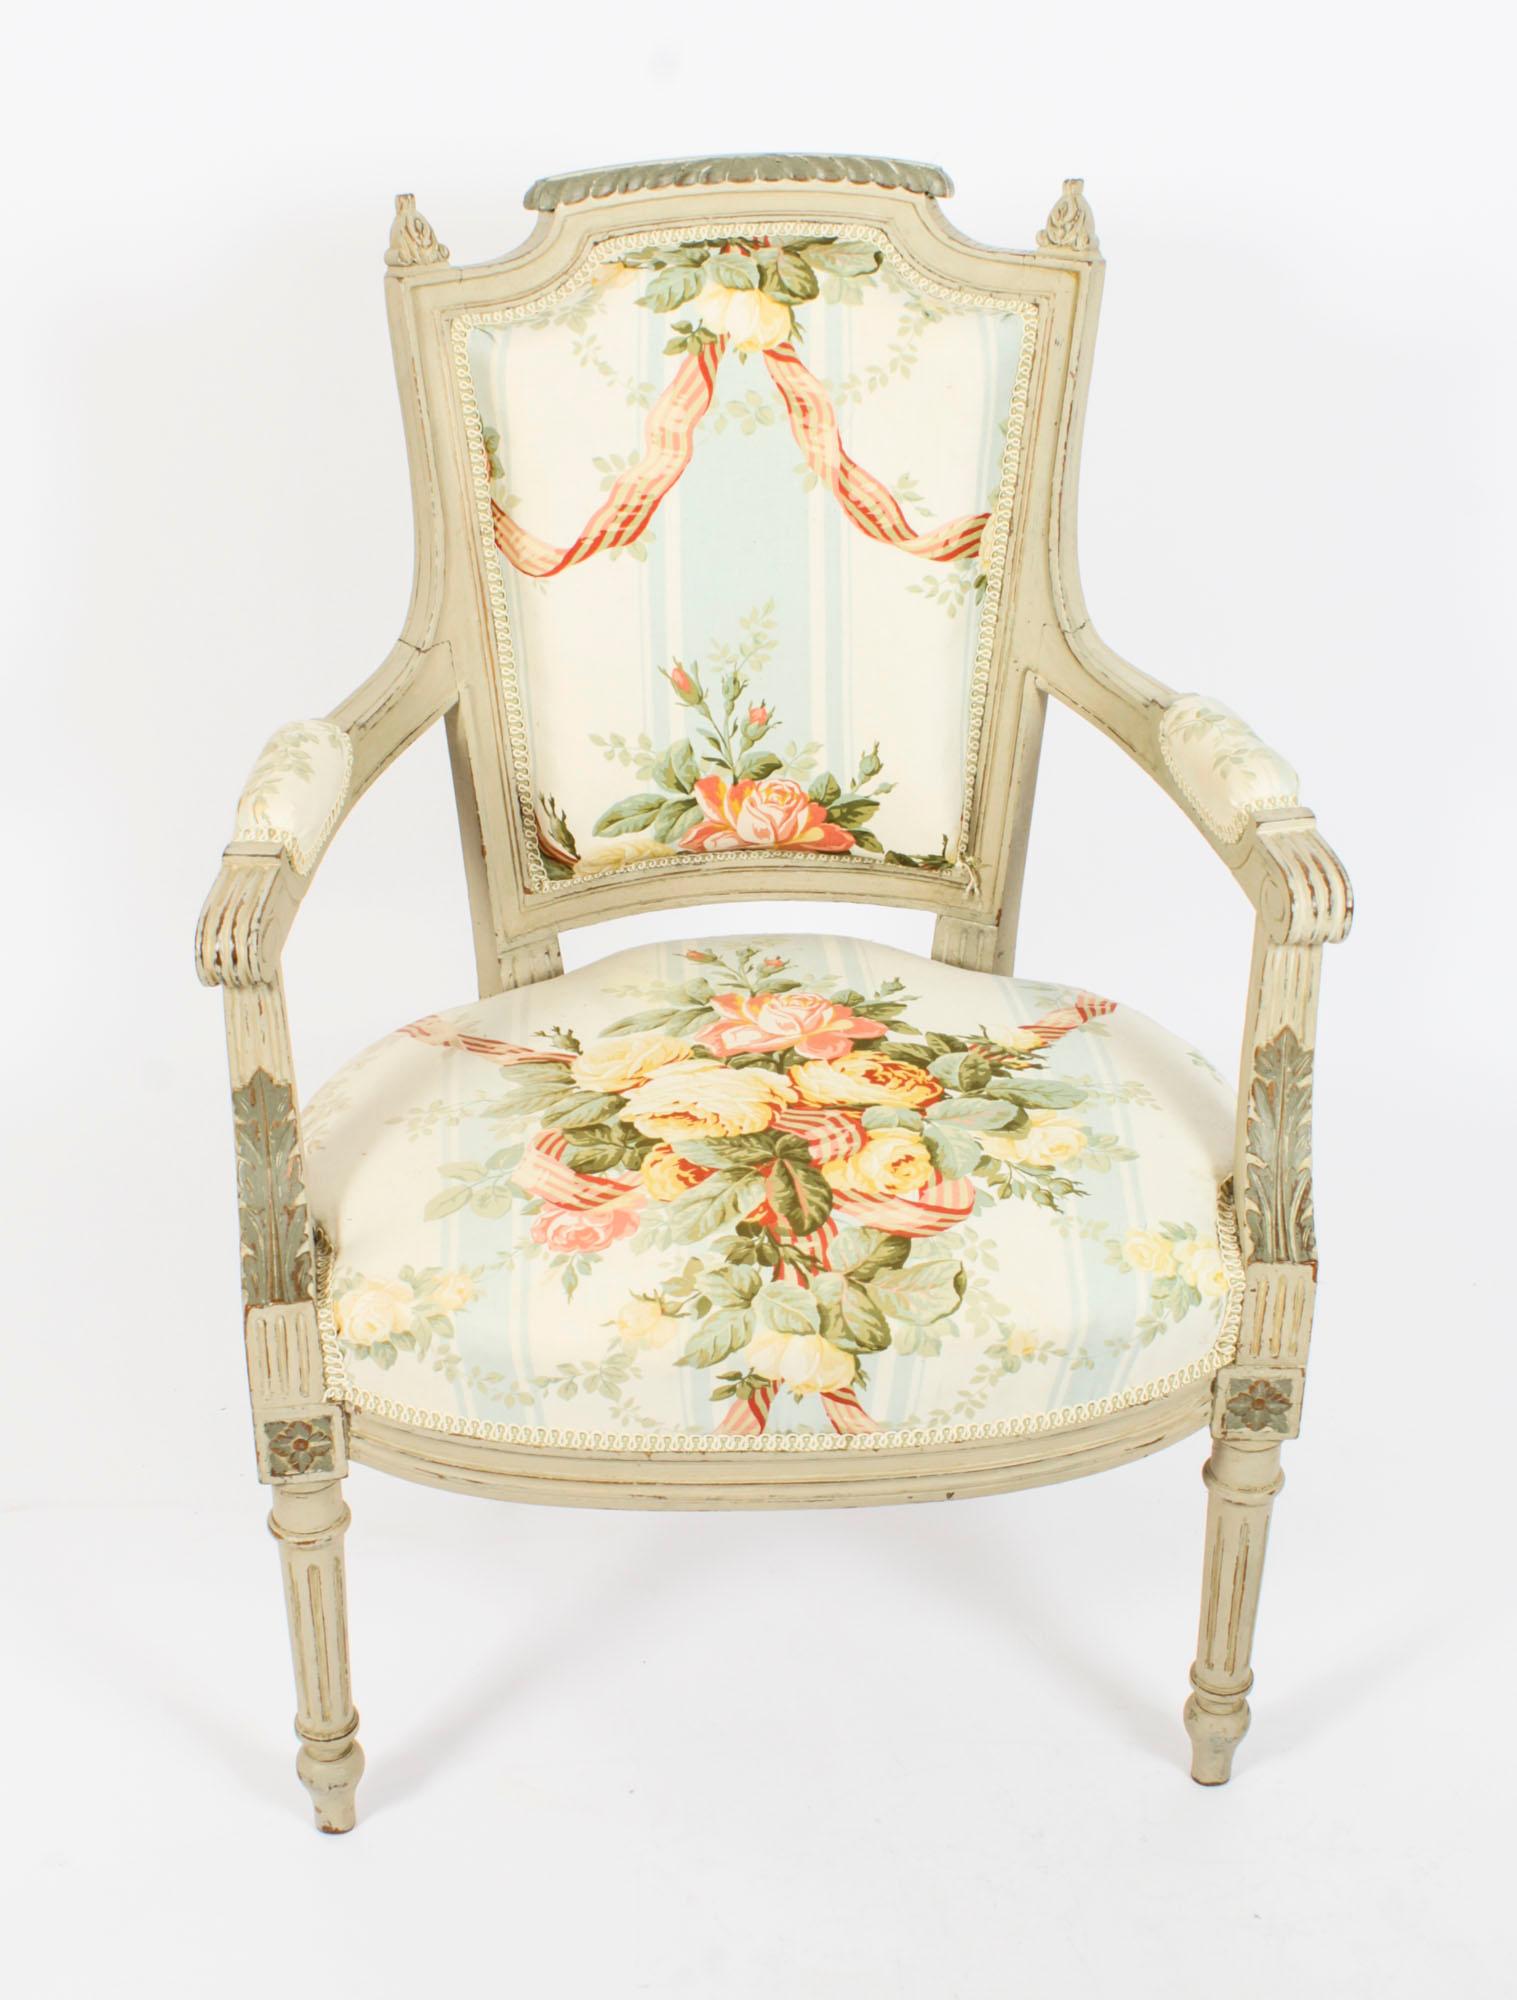 Antique Pair French Louis XVI Revival Painted Fauteuil Armchairs, 19th Century For Sale 8